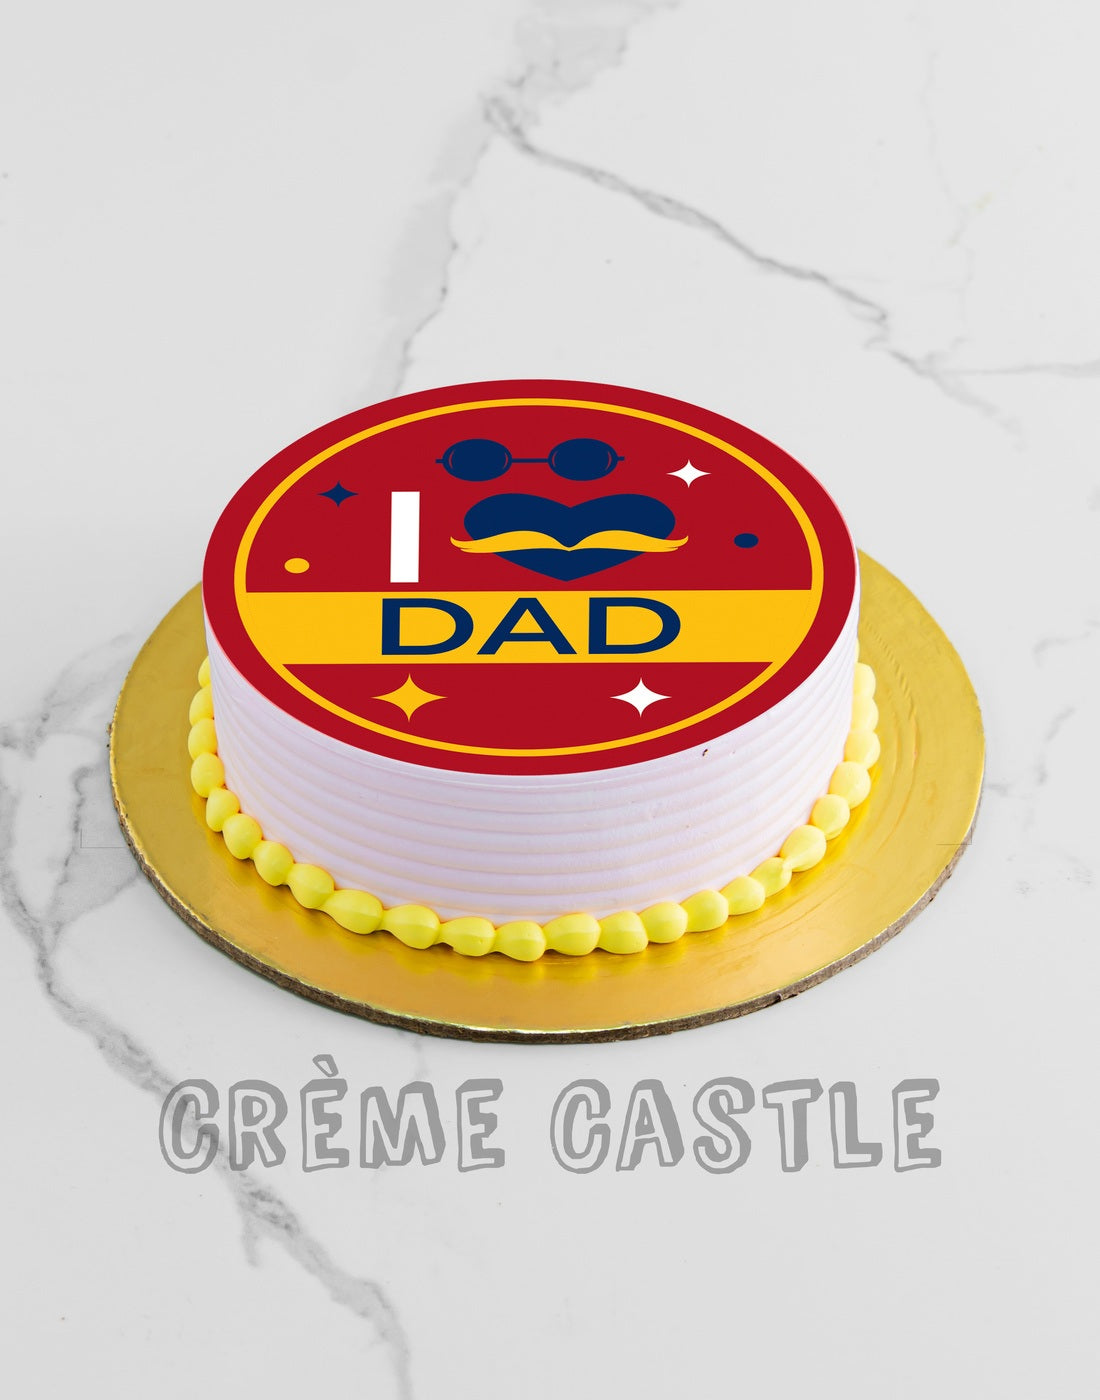 I Love dad Red Cake